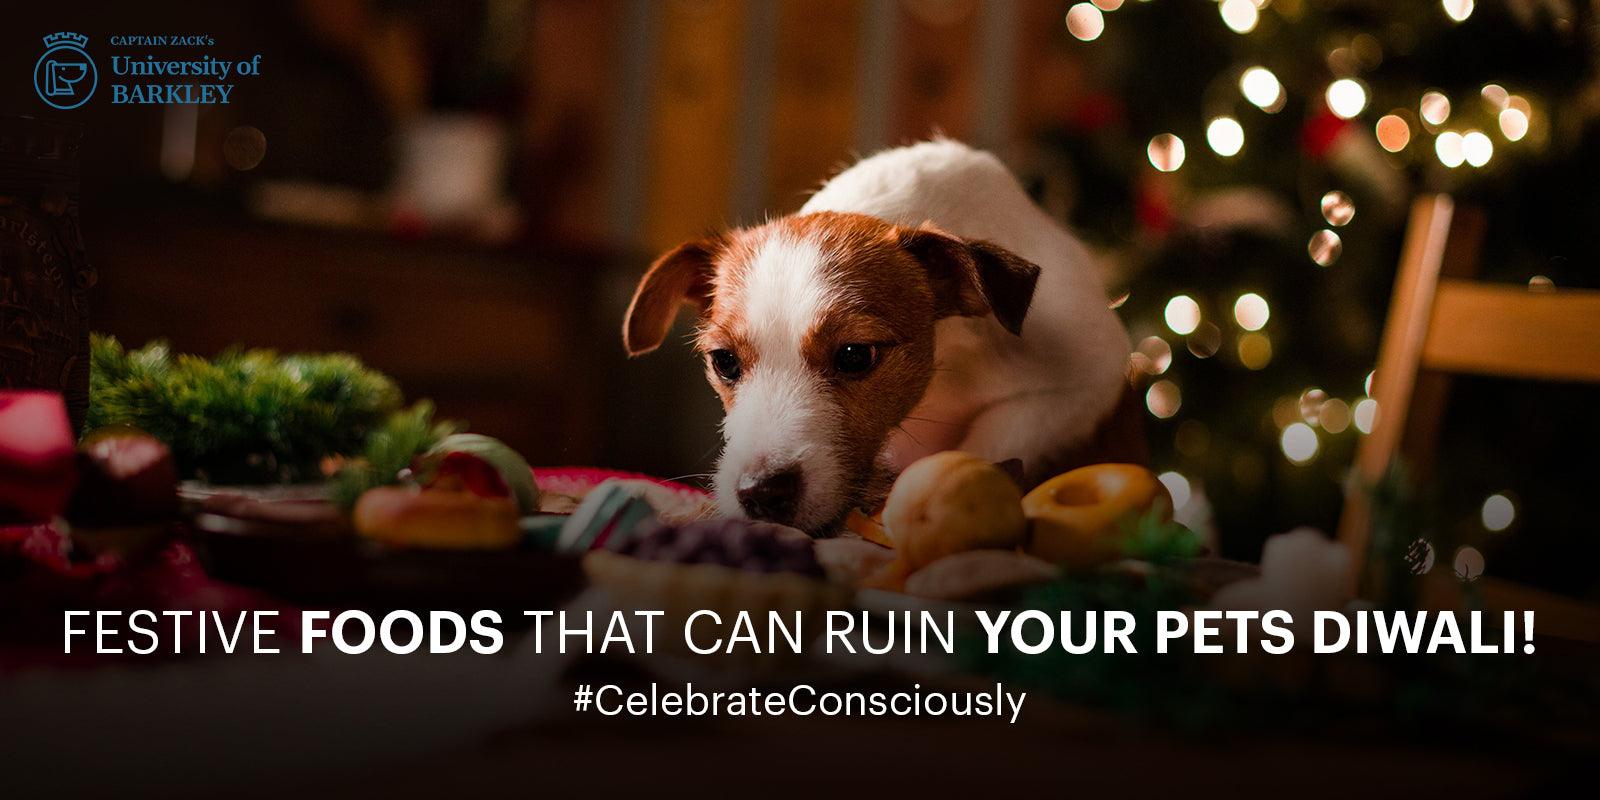 Festive Foods That Can Ruin Your Pets Diwali! - Captain Zack